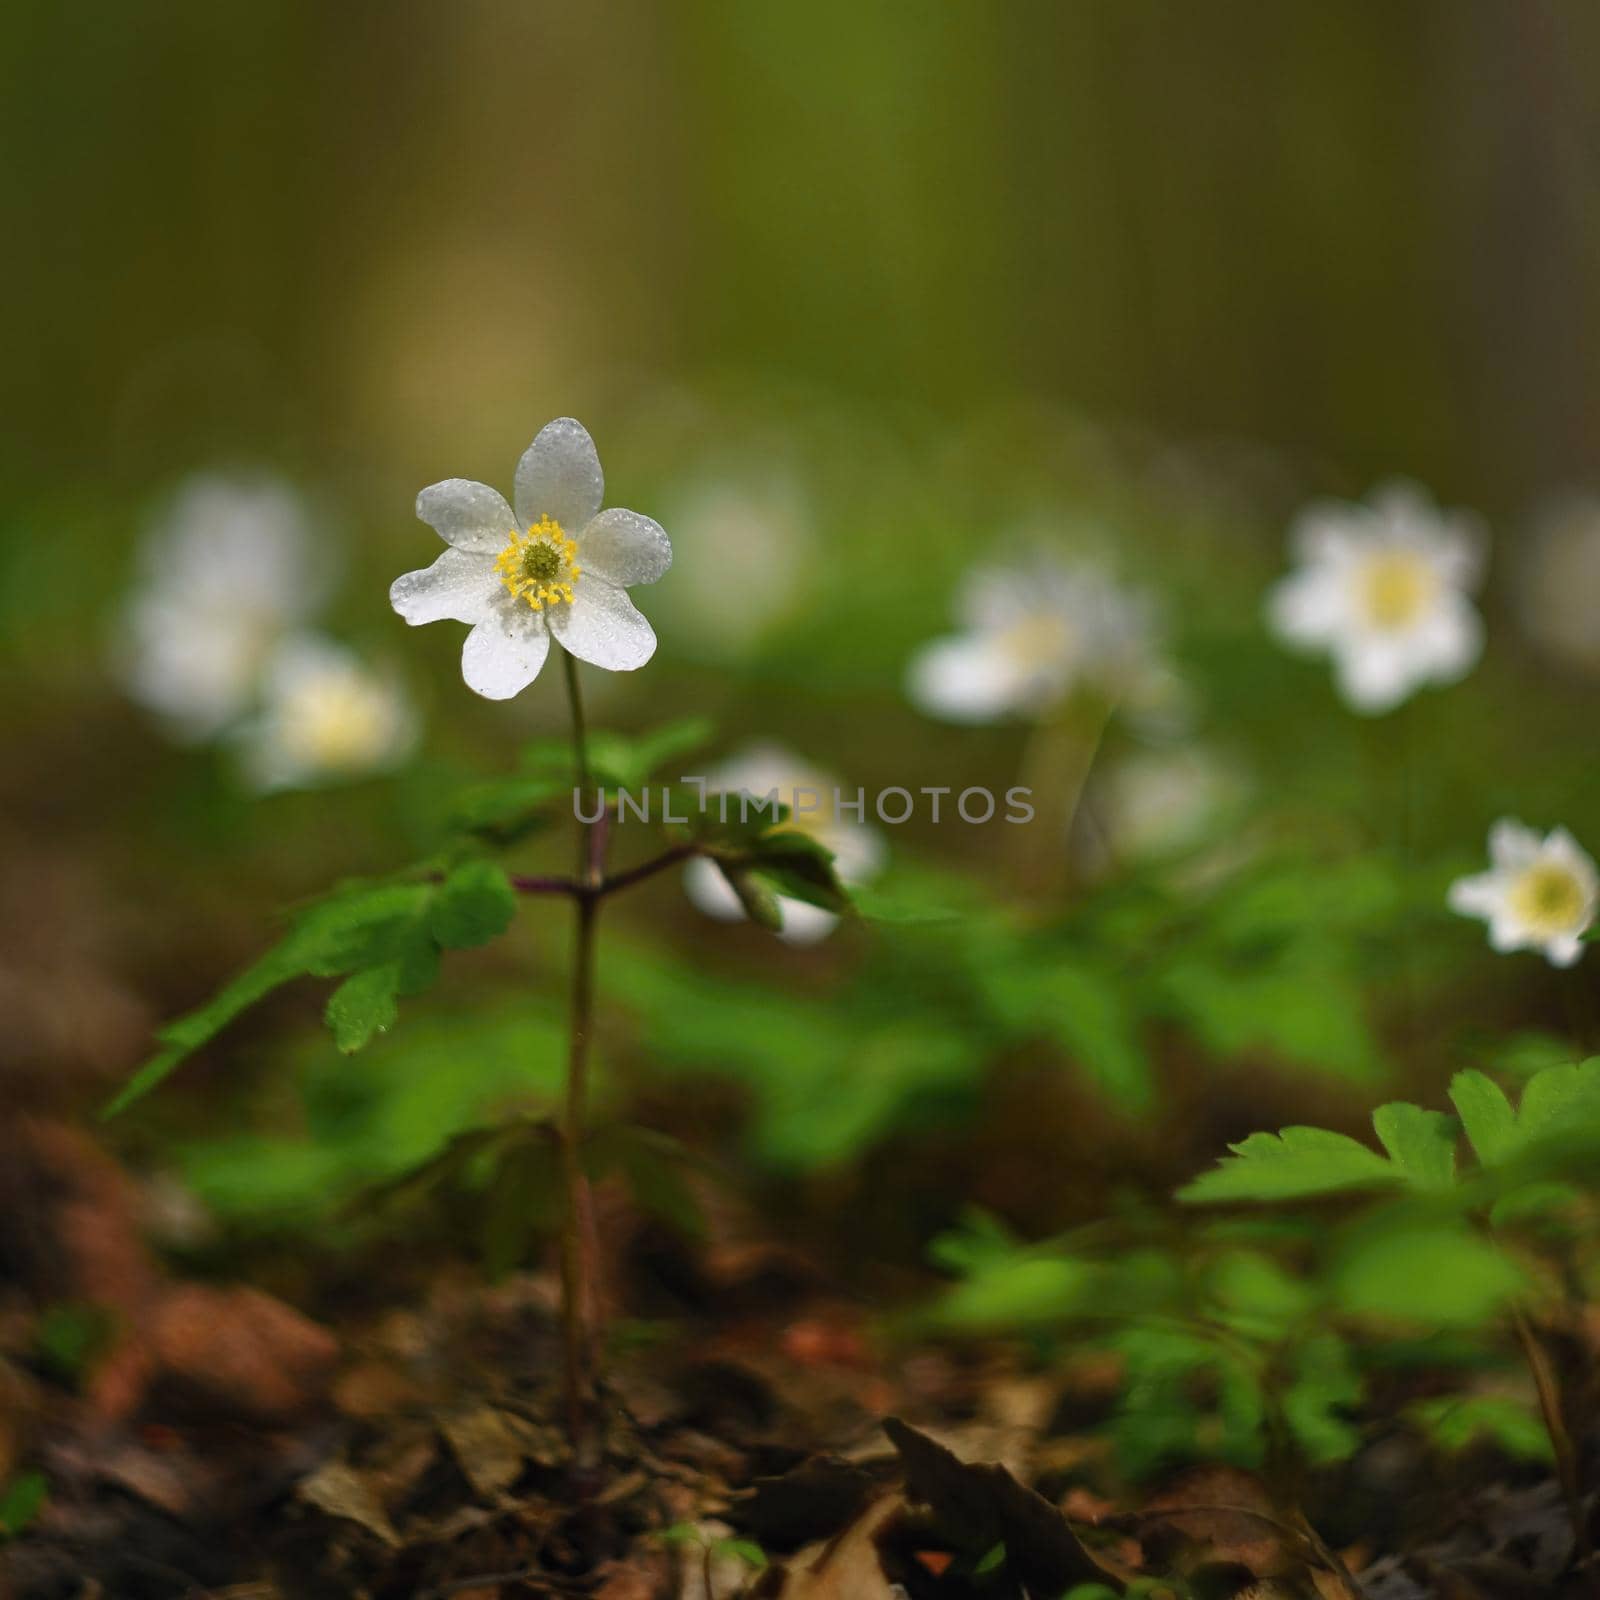 Spring white flowers in the grass Anemone (Isopyrum thalictroides) by Montypeter